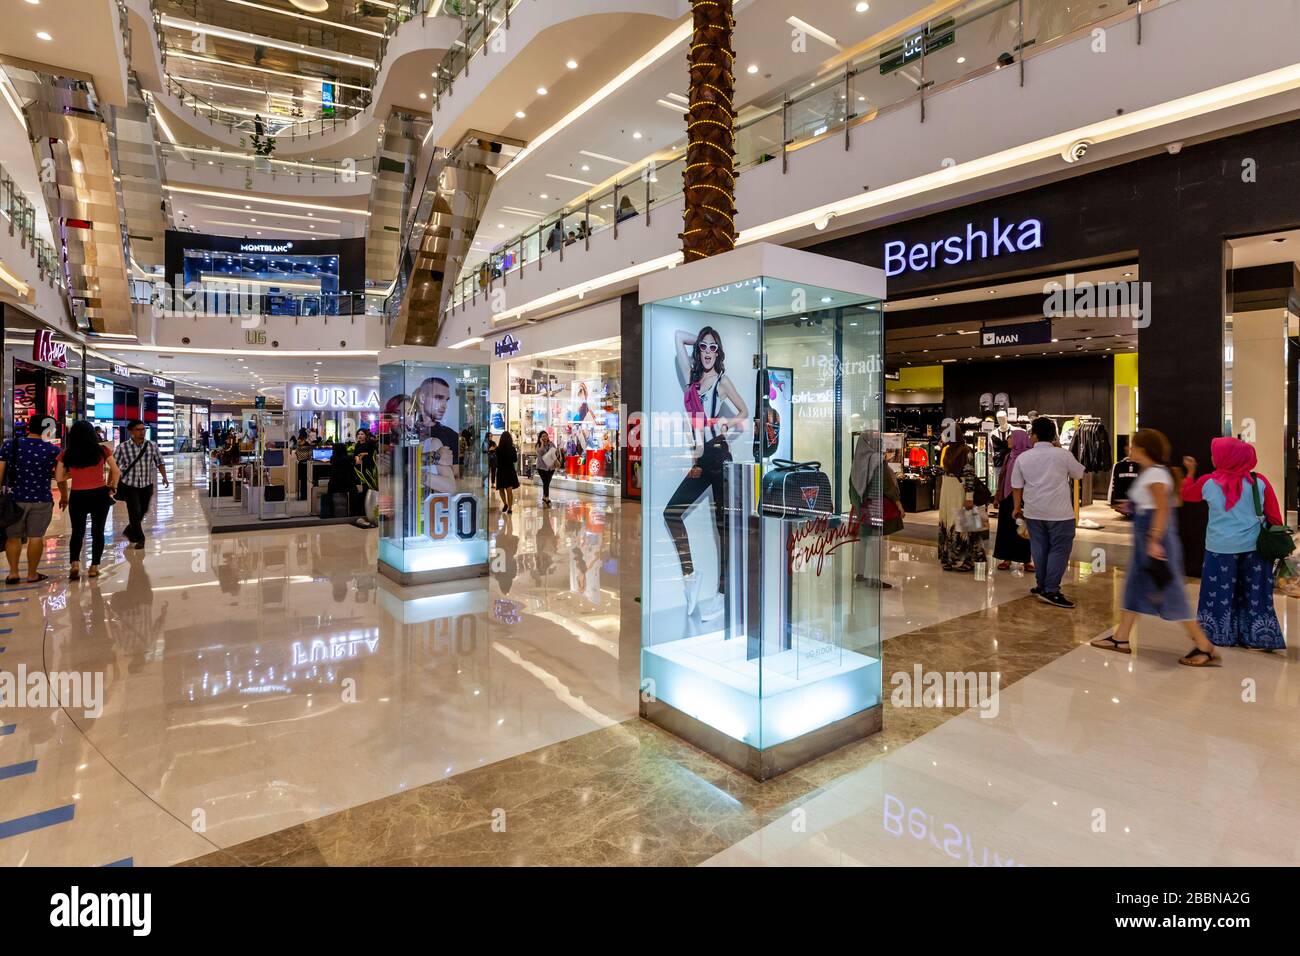 The Central Park Mall, Jakarta, Indonesia Stock Photo - Alamy